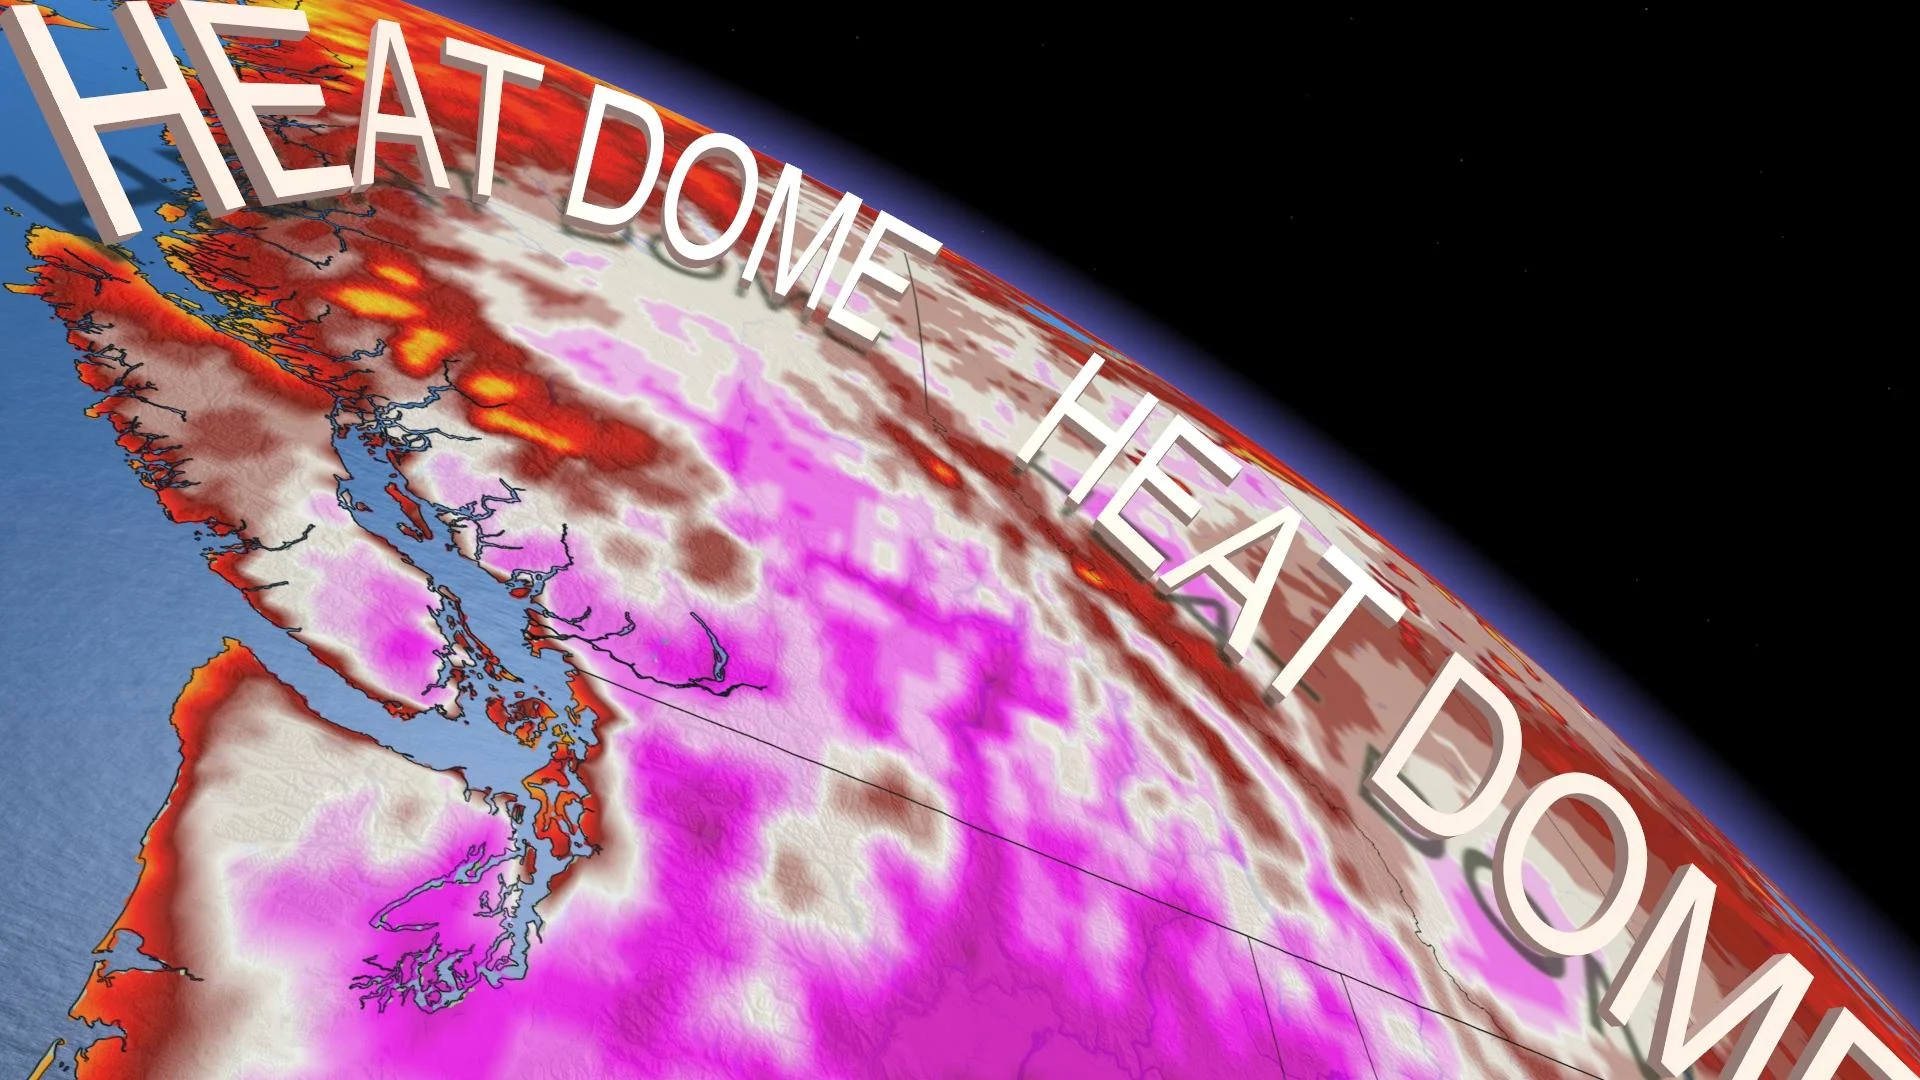 Heat dome inflates over Western Canada, the harbinger of all-time warmth?